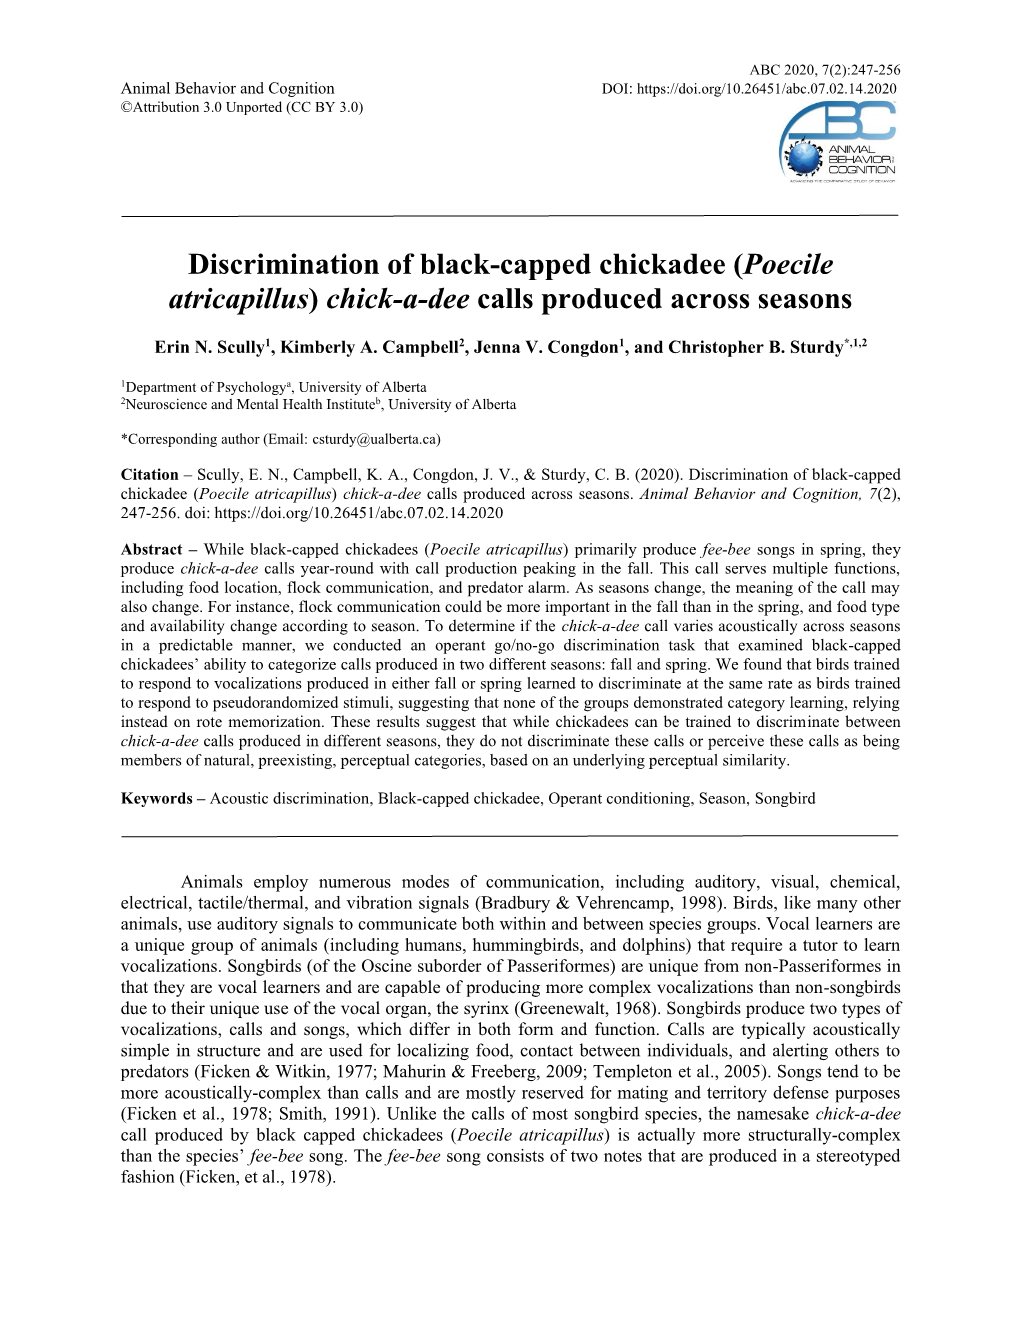 Discrimination of Black-Capped Chickadee (Poecile Atricapillus) Chick-A-Dee Calls Produced Across Seasons